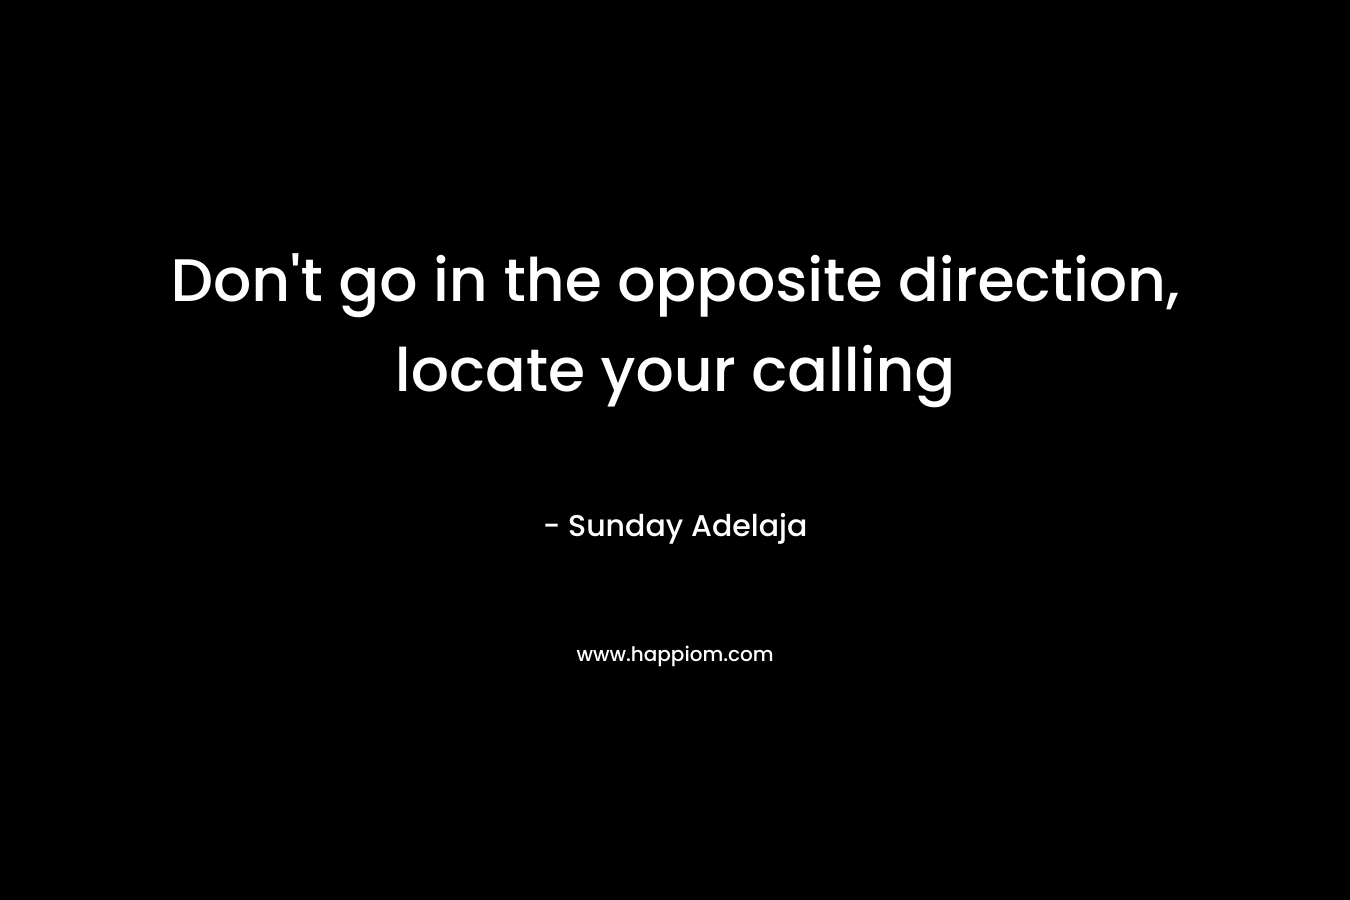 Don't go in the opposite direction, locate your calling